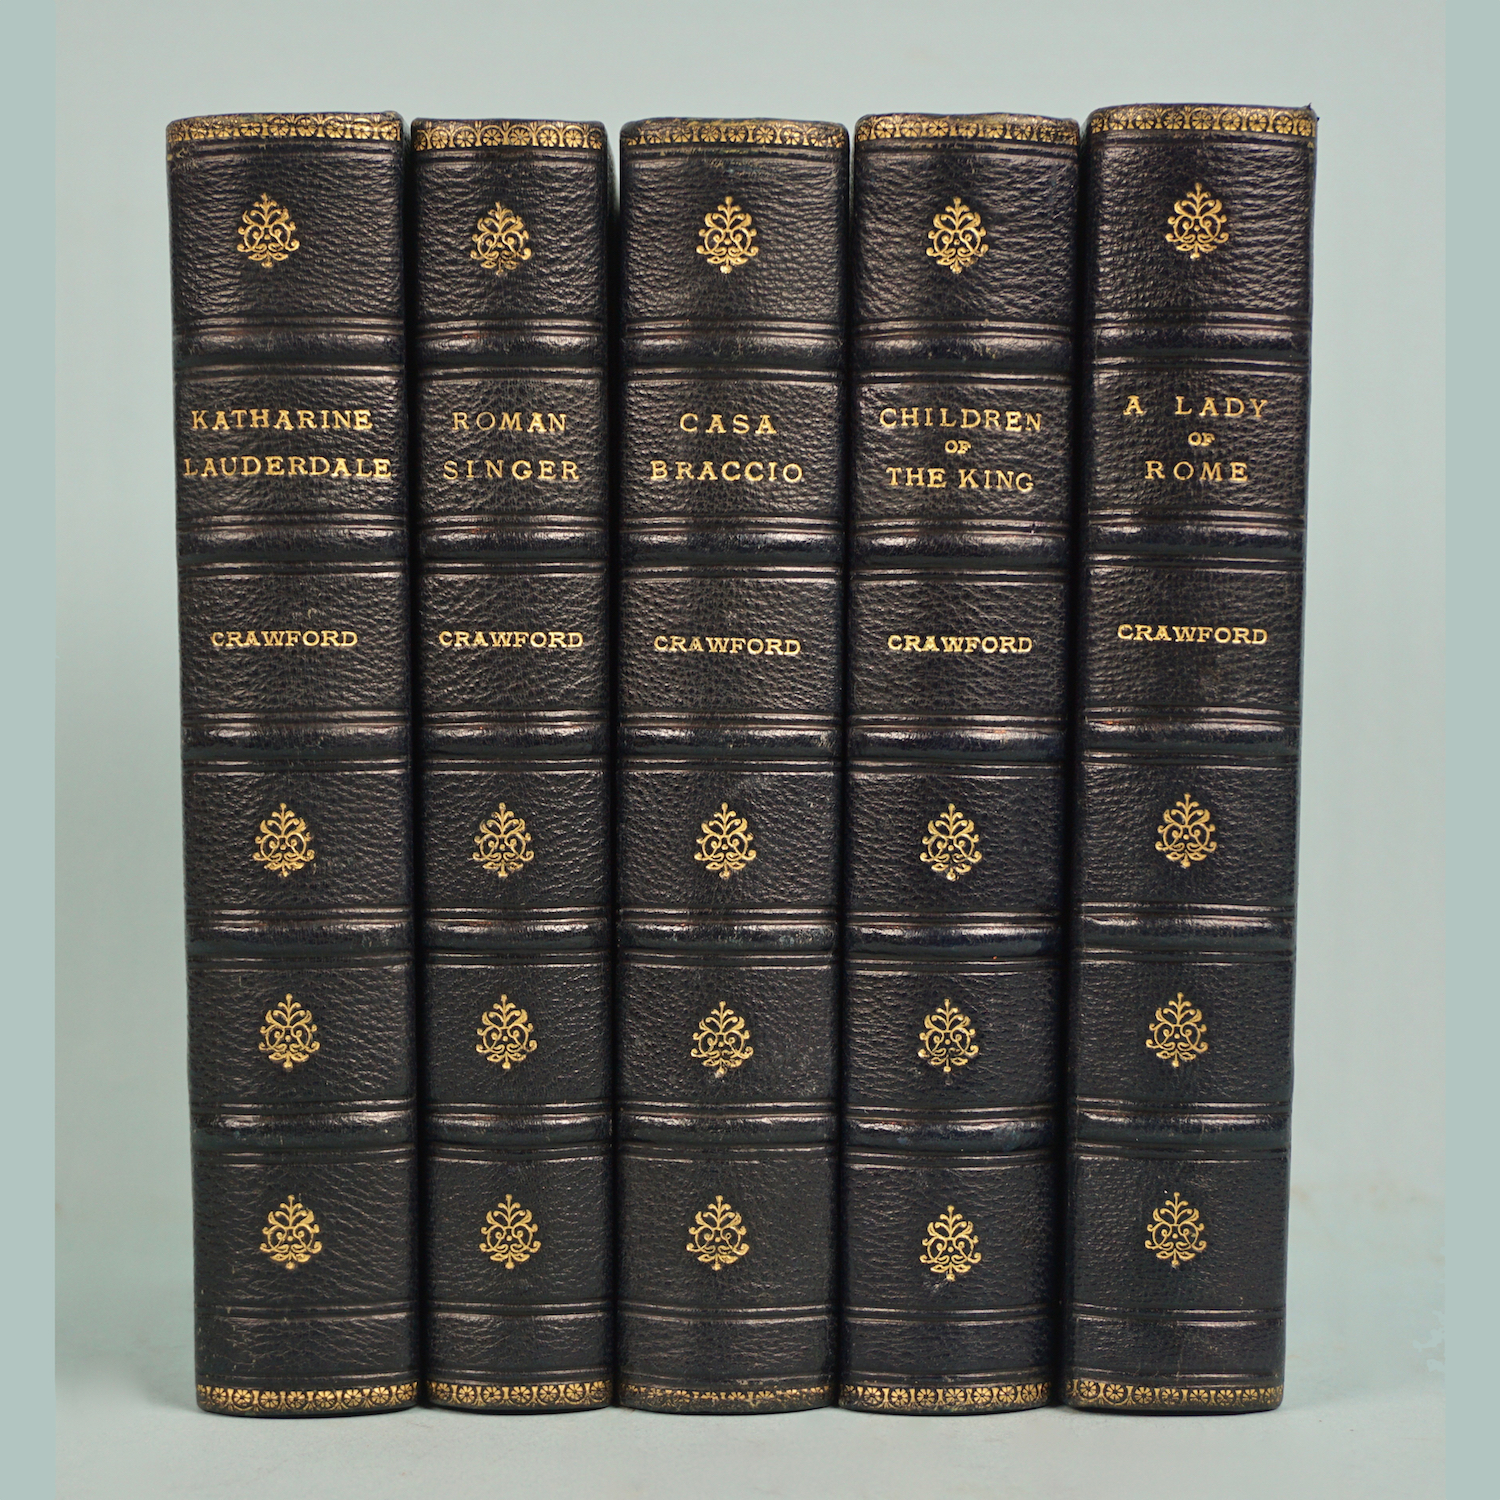 f-crawford-5-volumes-bound-blue-morocco-leather-with-gilt-spines-c920-11